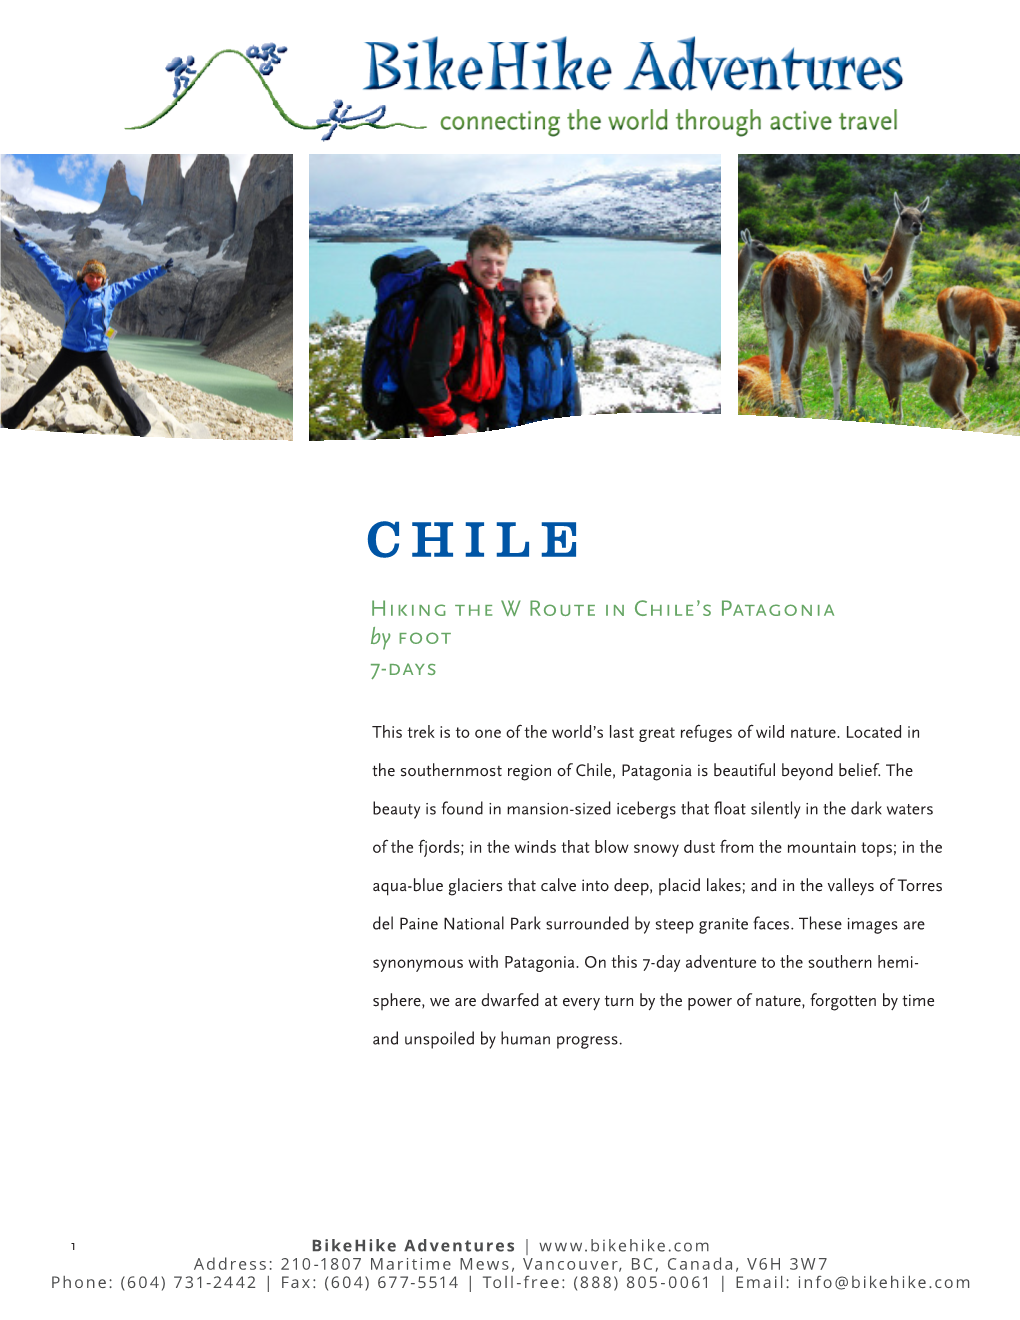 Hiking the W Route in CHILE's Patagonia by FOOT 7-Days